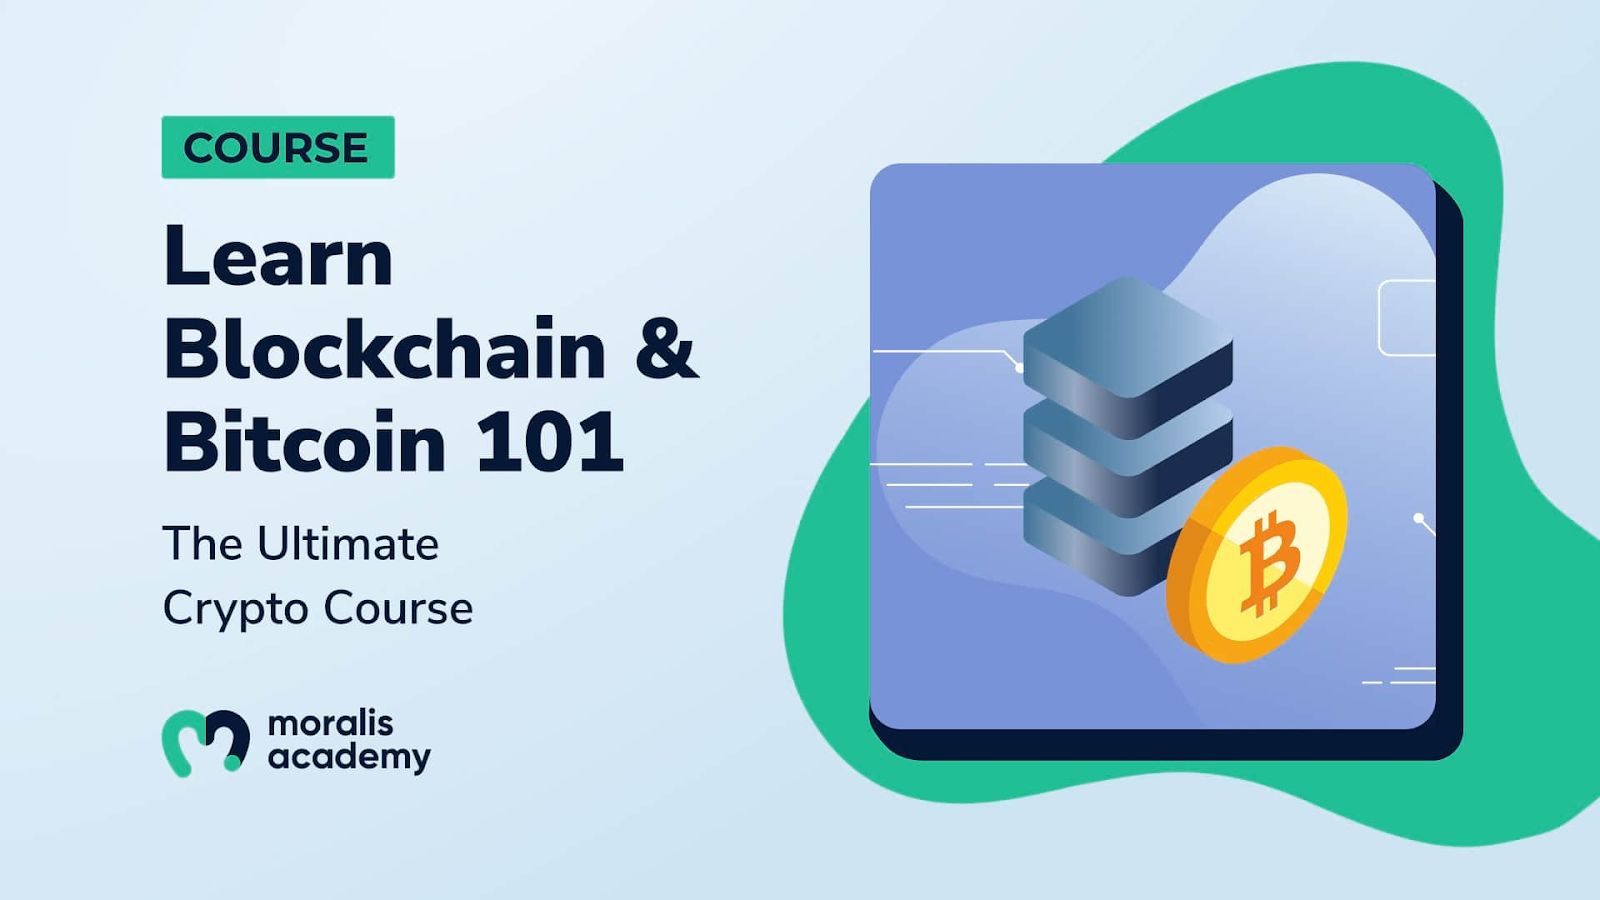 Blockchain & Bitcoin 101 course is ideal for businesses looking for the best blockchain course!